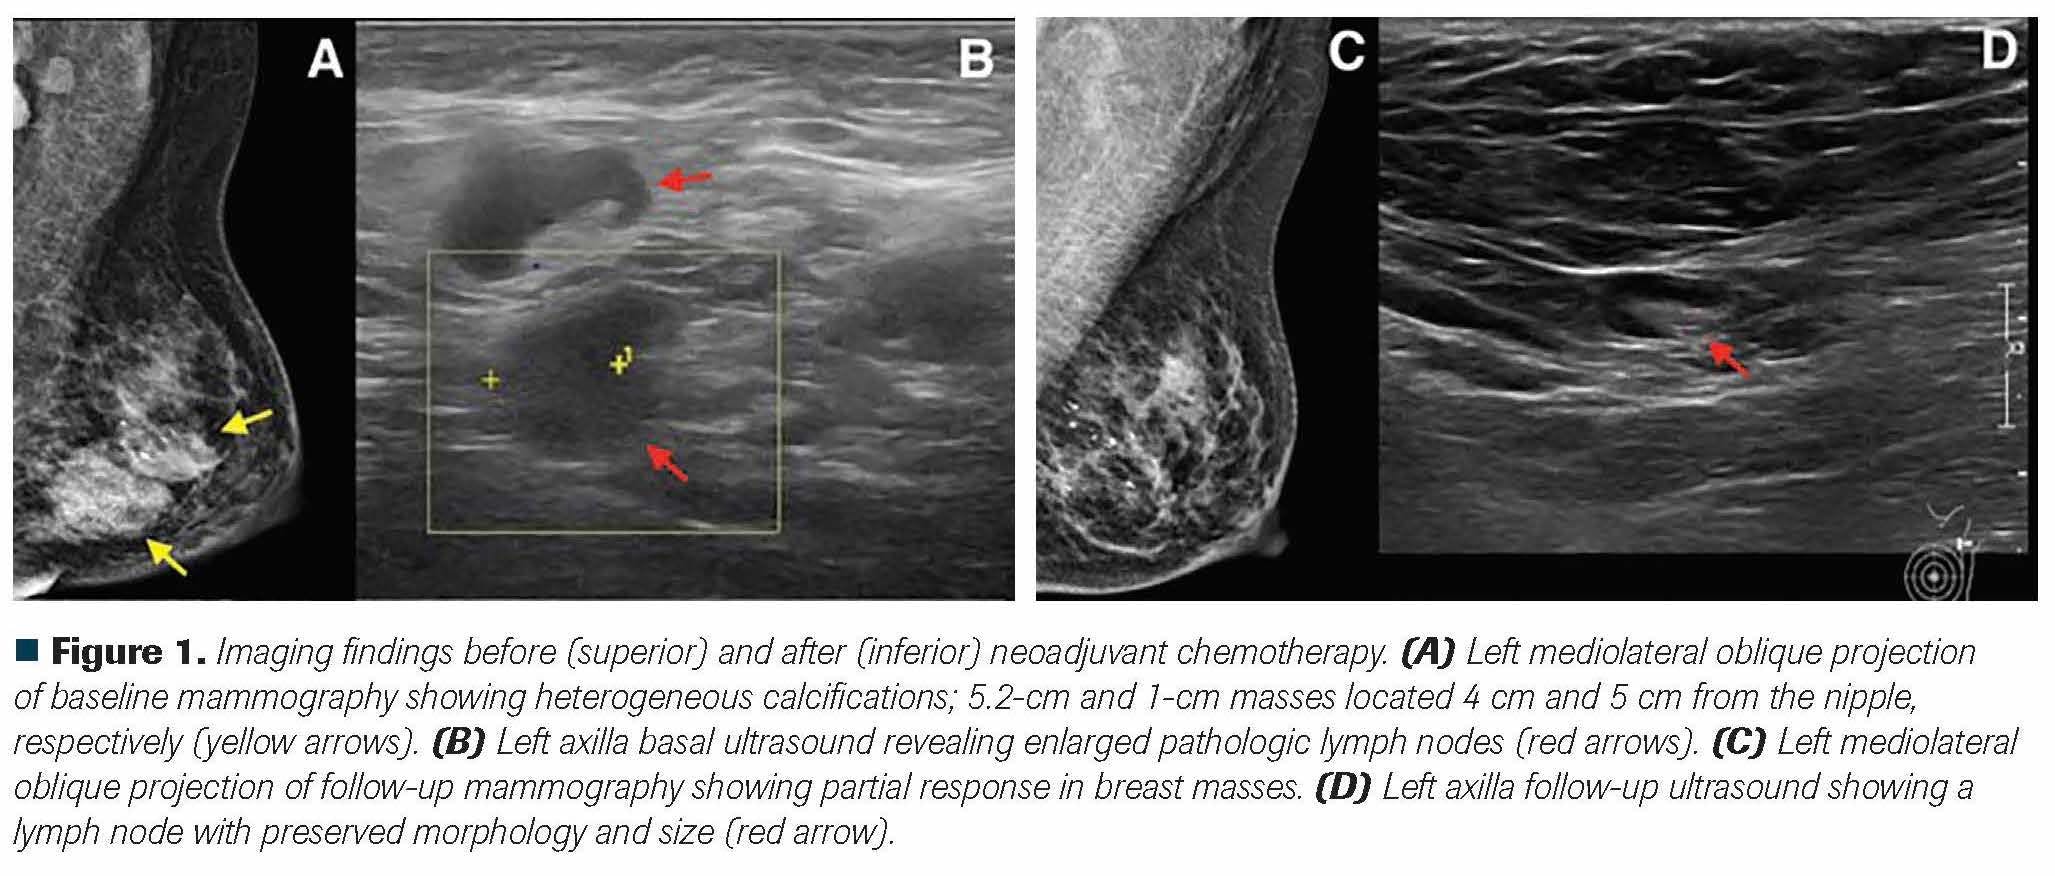 Figure 1. Imaging findings before (superior) and after (inferior) neoadjuvant chemotherapy. (A) Left mediolateral oblique projection of baseline mammography showing heterogeneous calcifications; 5.2-cm and 1-cm masses located 4 cm and 5 cm from the nipple, respectively (yellow arrows). (B) Left axilla basal ultrasound revealing enlarged pathologic lymph nodes (red arrows). (C) Left mediolateral oblique projection of follow-up mammography showing partial response in breast masses. (D) Left axilla follow-up ultrasound showing a lymph node with preserved morphology and size (red arrow).